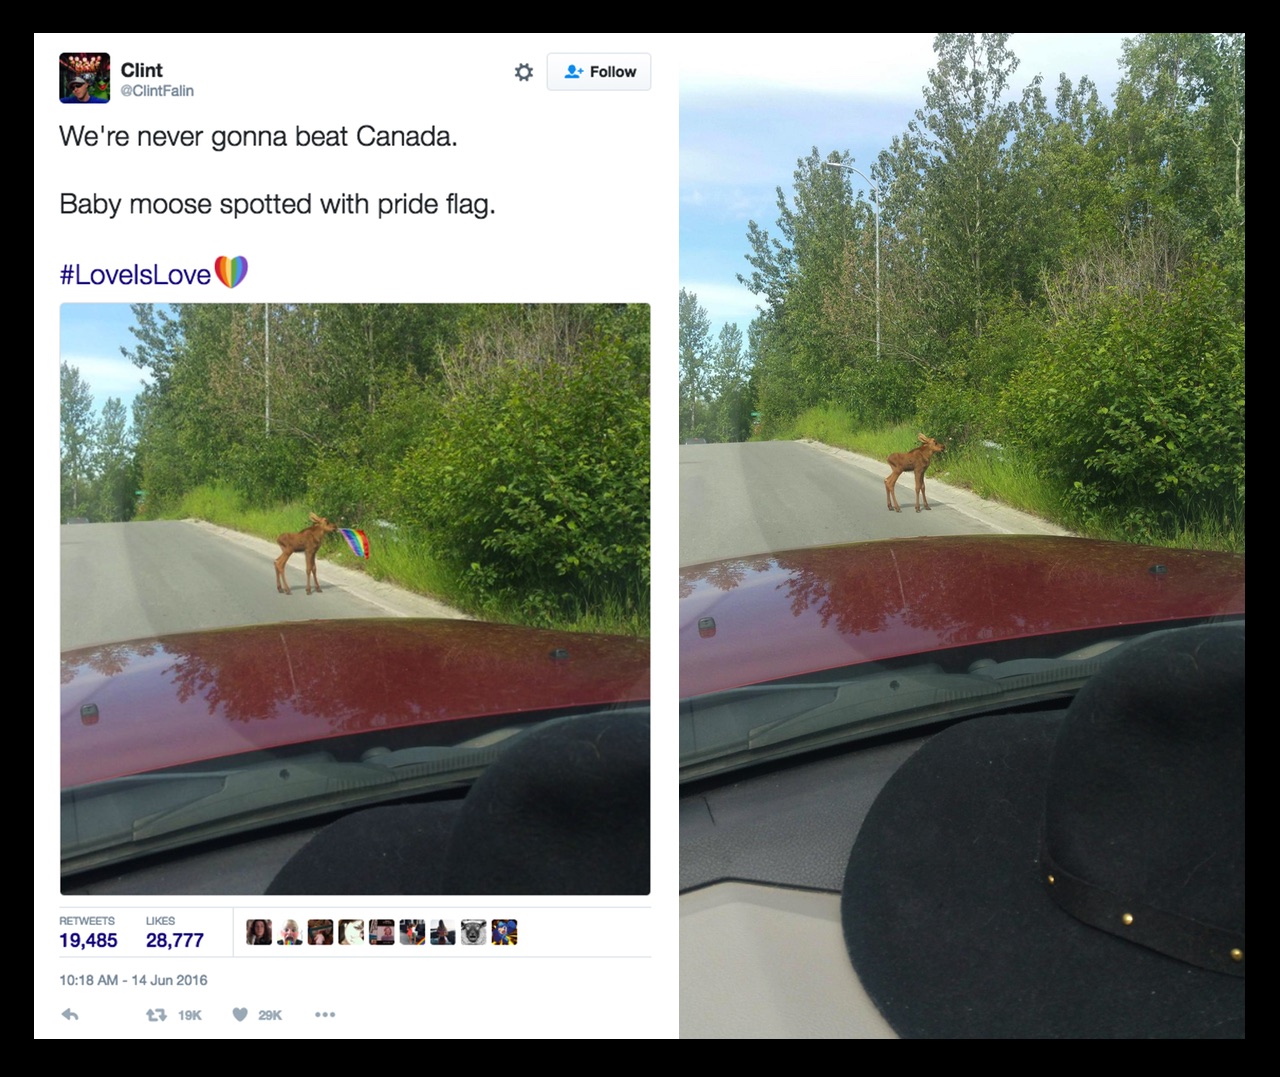 That Photo Of A Baby Moose With A Pride Flag Is Fake